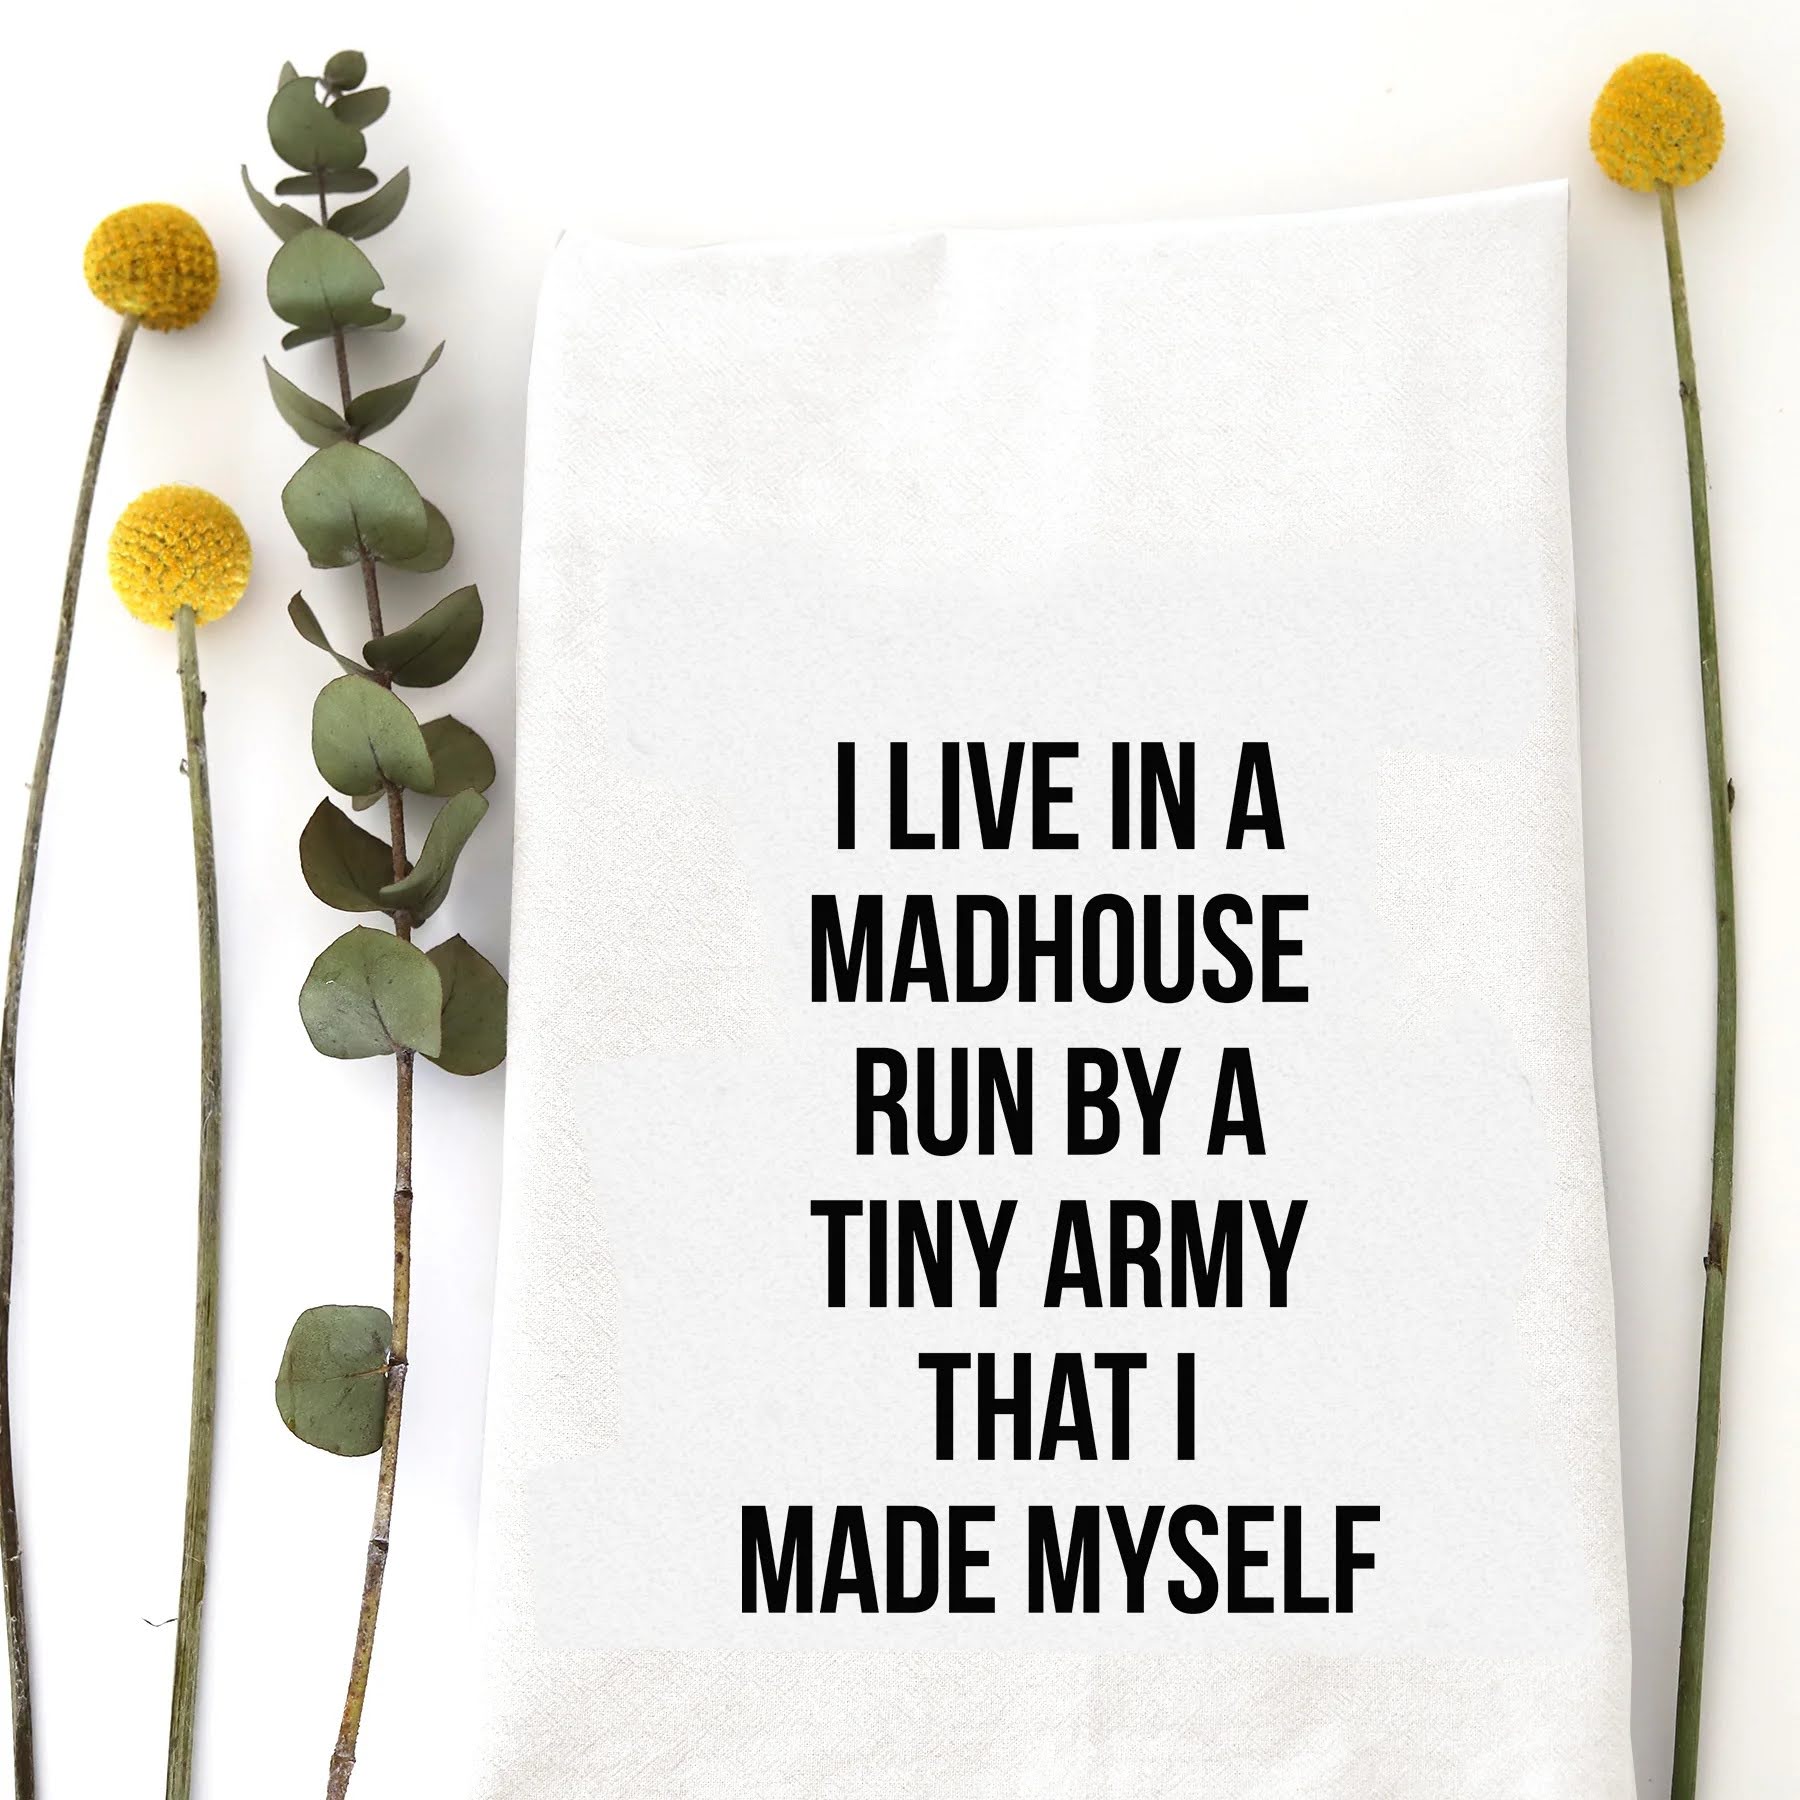 A tea towel with a funny saying - I live in a madhouse run by a tiny army that I made myself.